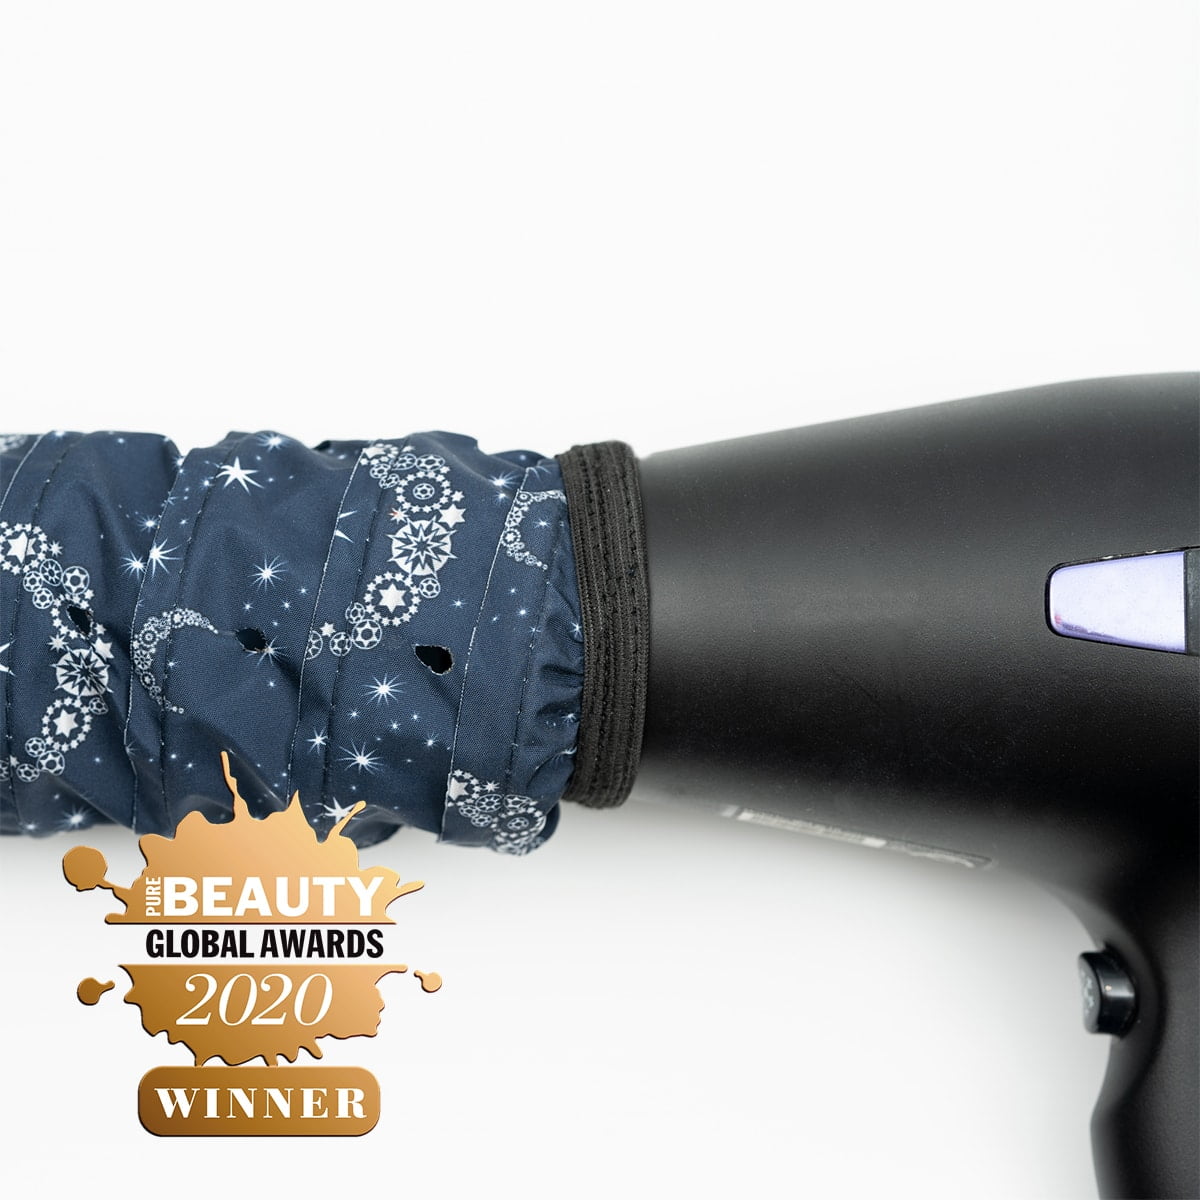 Bright as a Star edition Softhood® attachment - WINNER of the Pure Beauty awards 'Best New Inclusive Hair Product' 2020